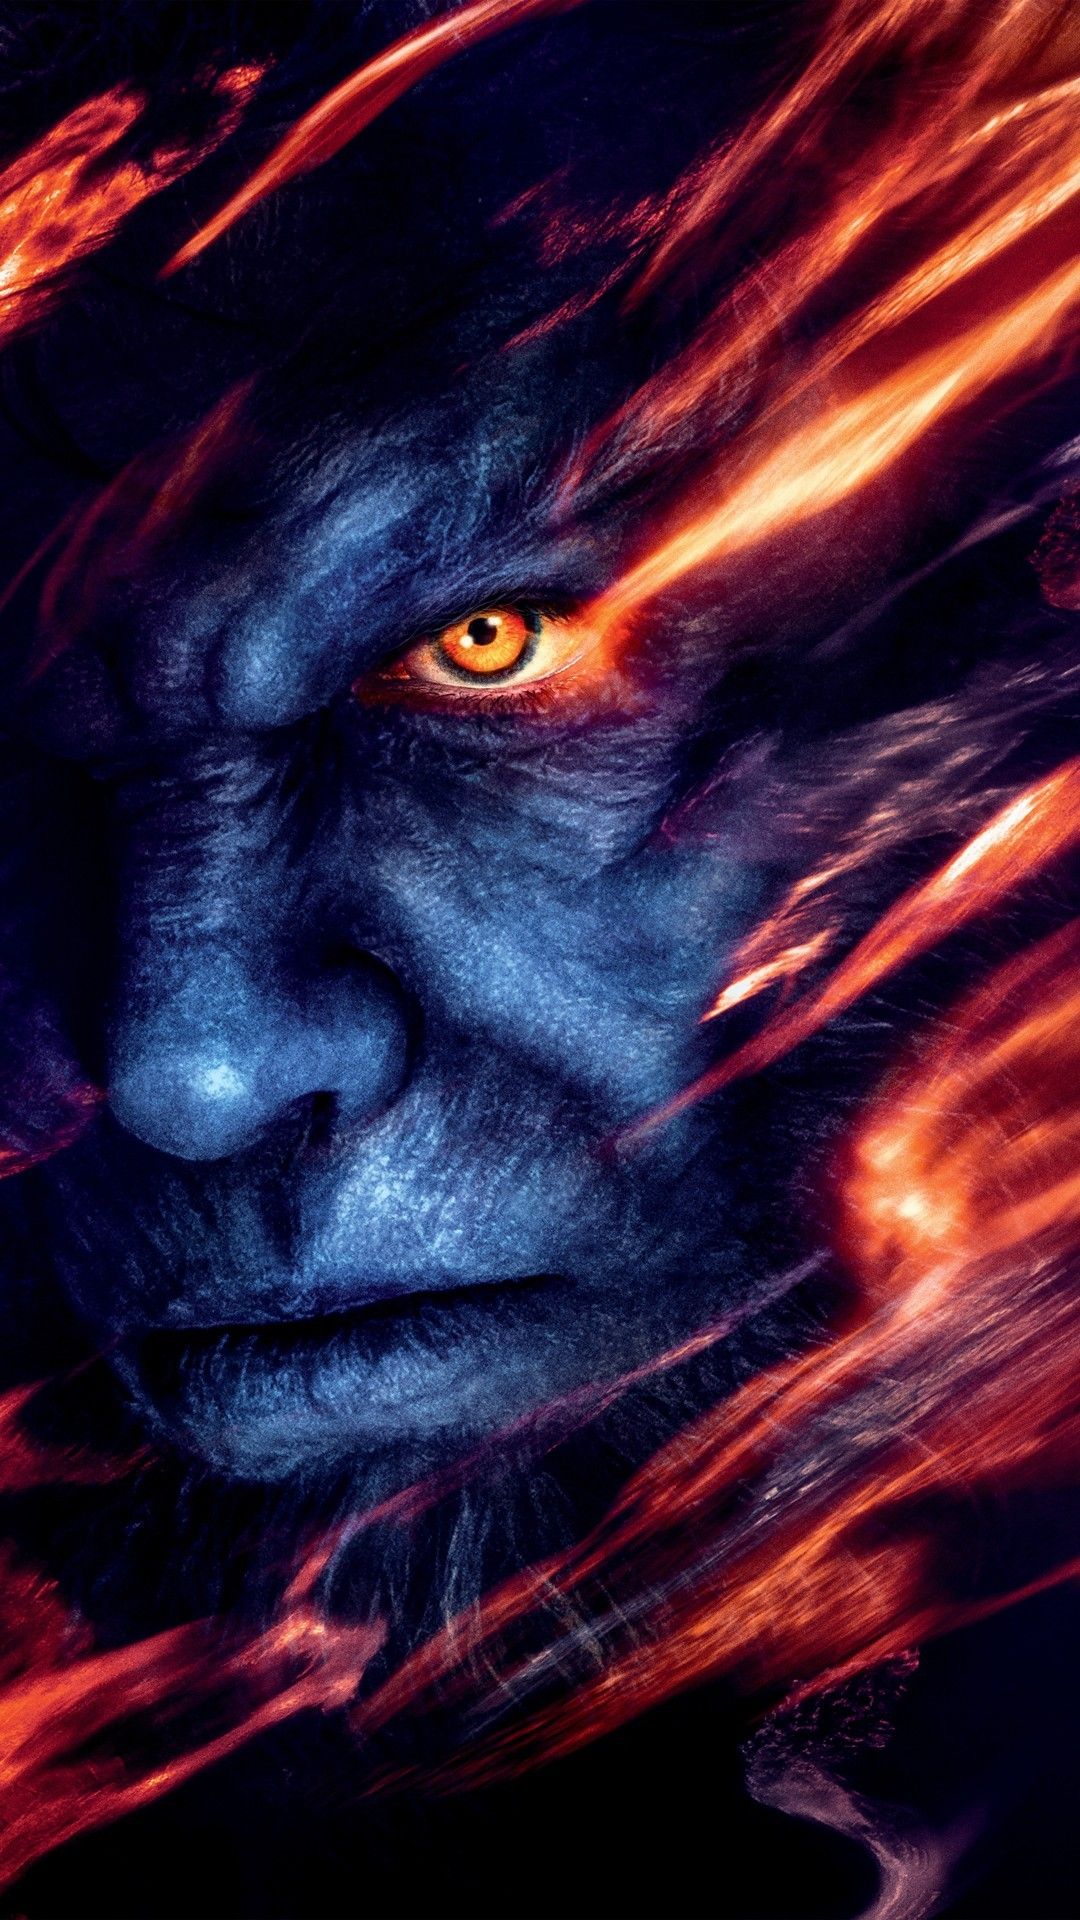 Free download Dark Phoenix 2019 HD Wallpaper For Android 2019